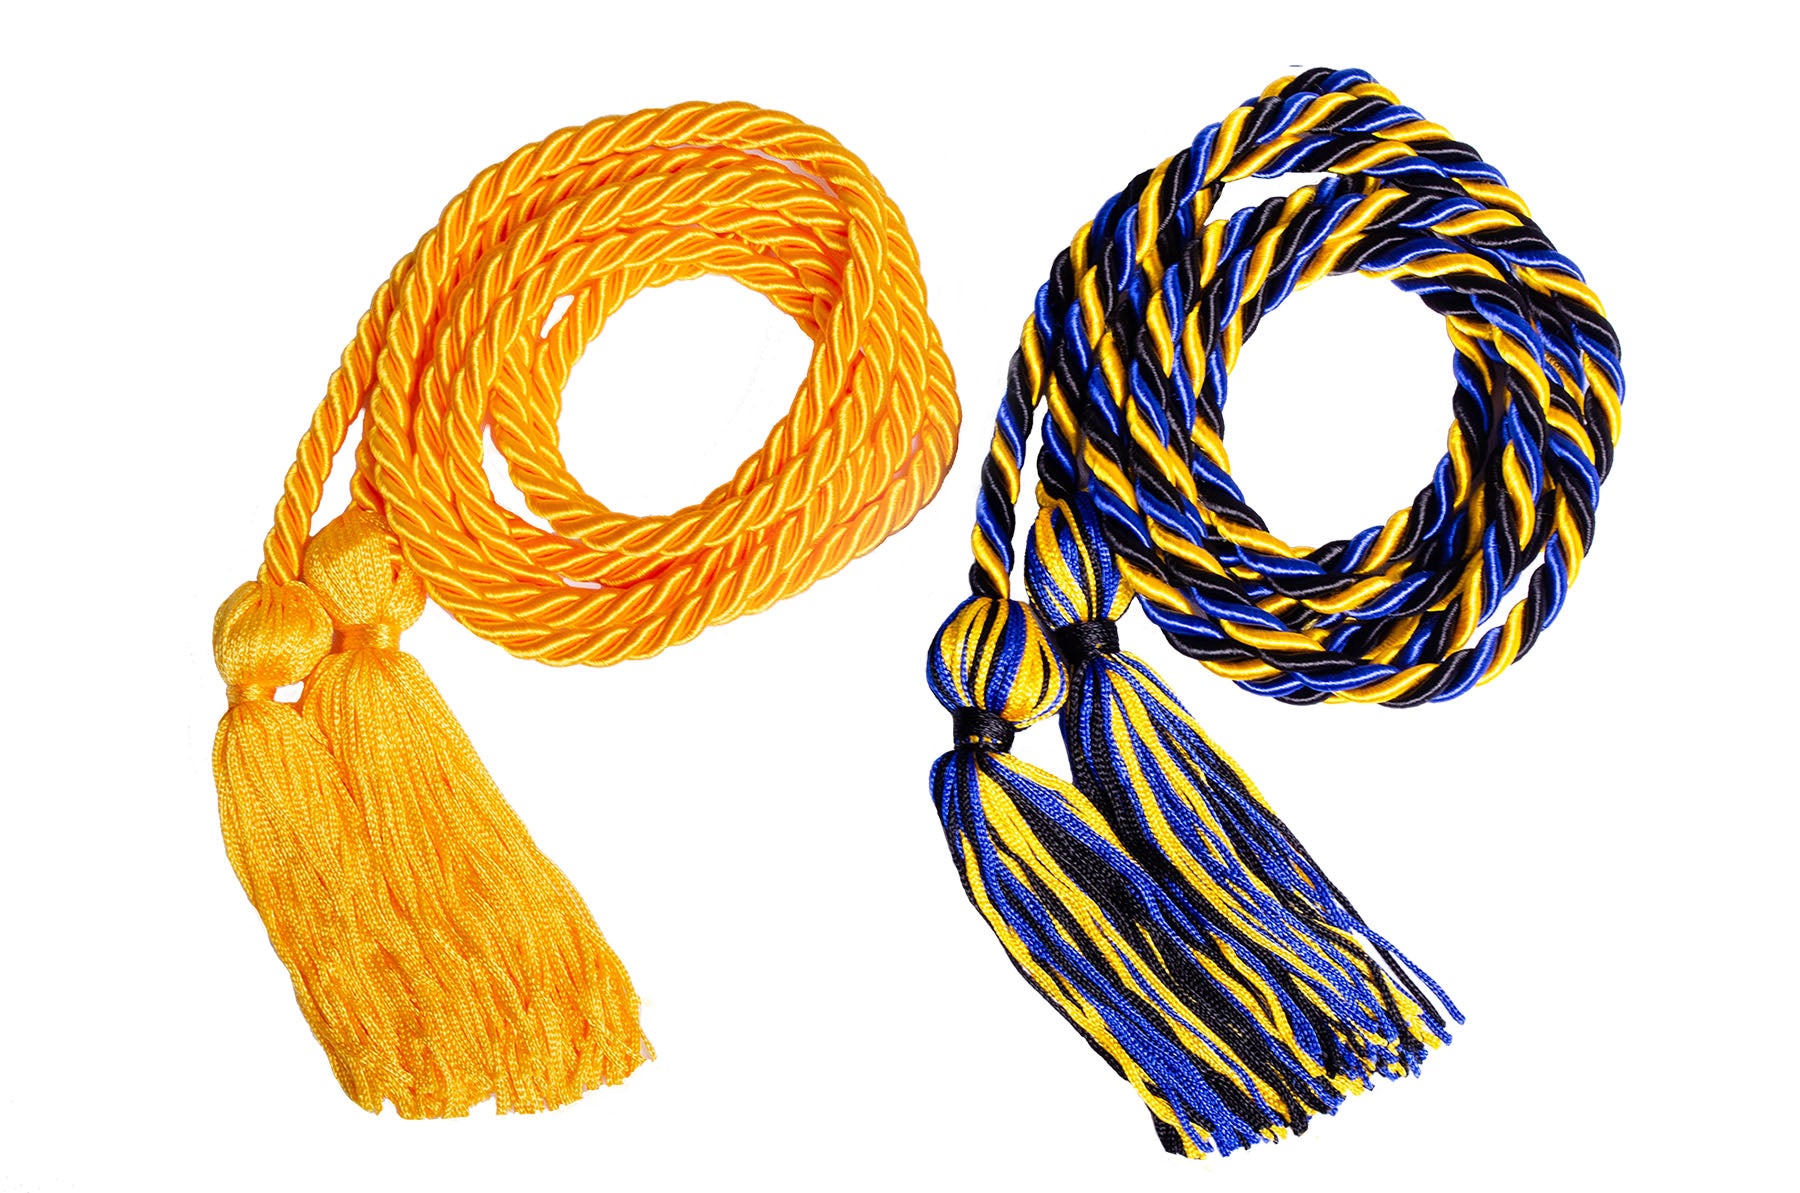 HOVEOX 8 Pieces Graduation Honor Cords Graduation Tassel Honor Cord Graduation  Cords Bulk Honor Cords for Graduation Students Black, Blue, Green, Red,  Yellow, White, Gray, Pink 8